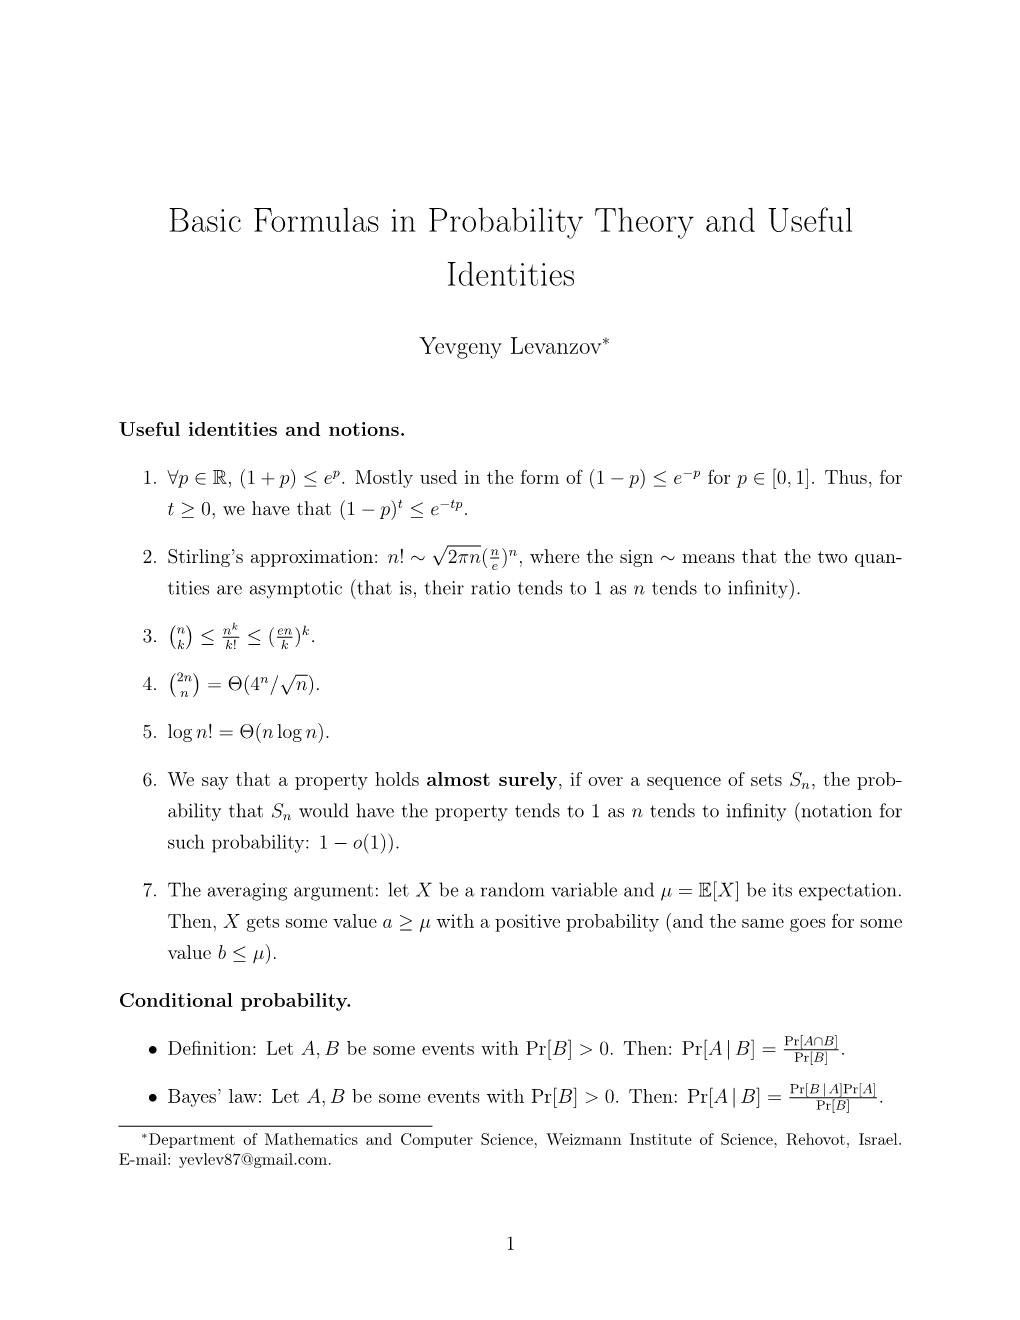 Basic Formulas in Probability Theory and Useful Identities